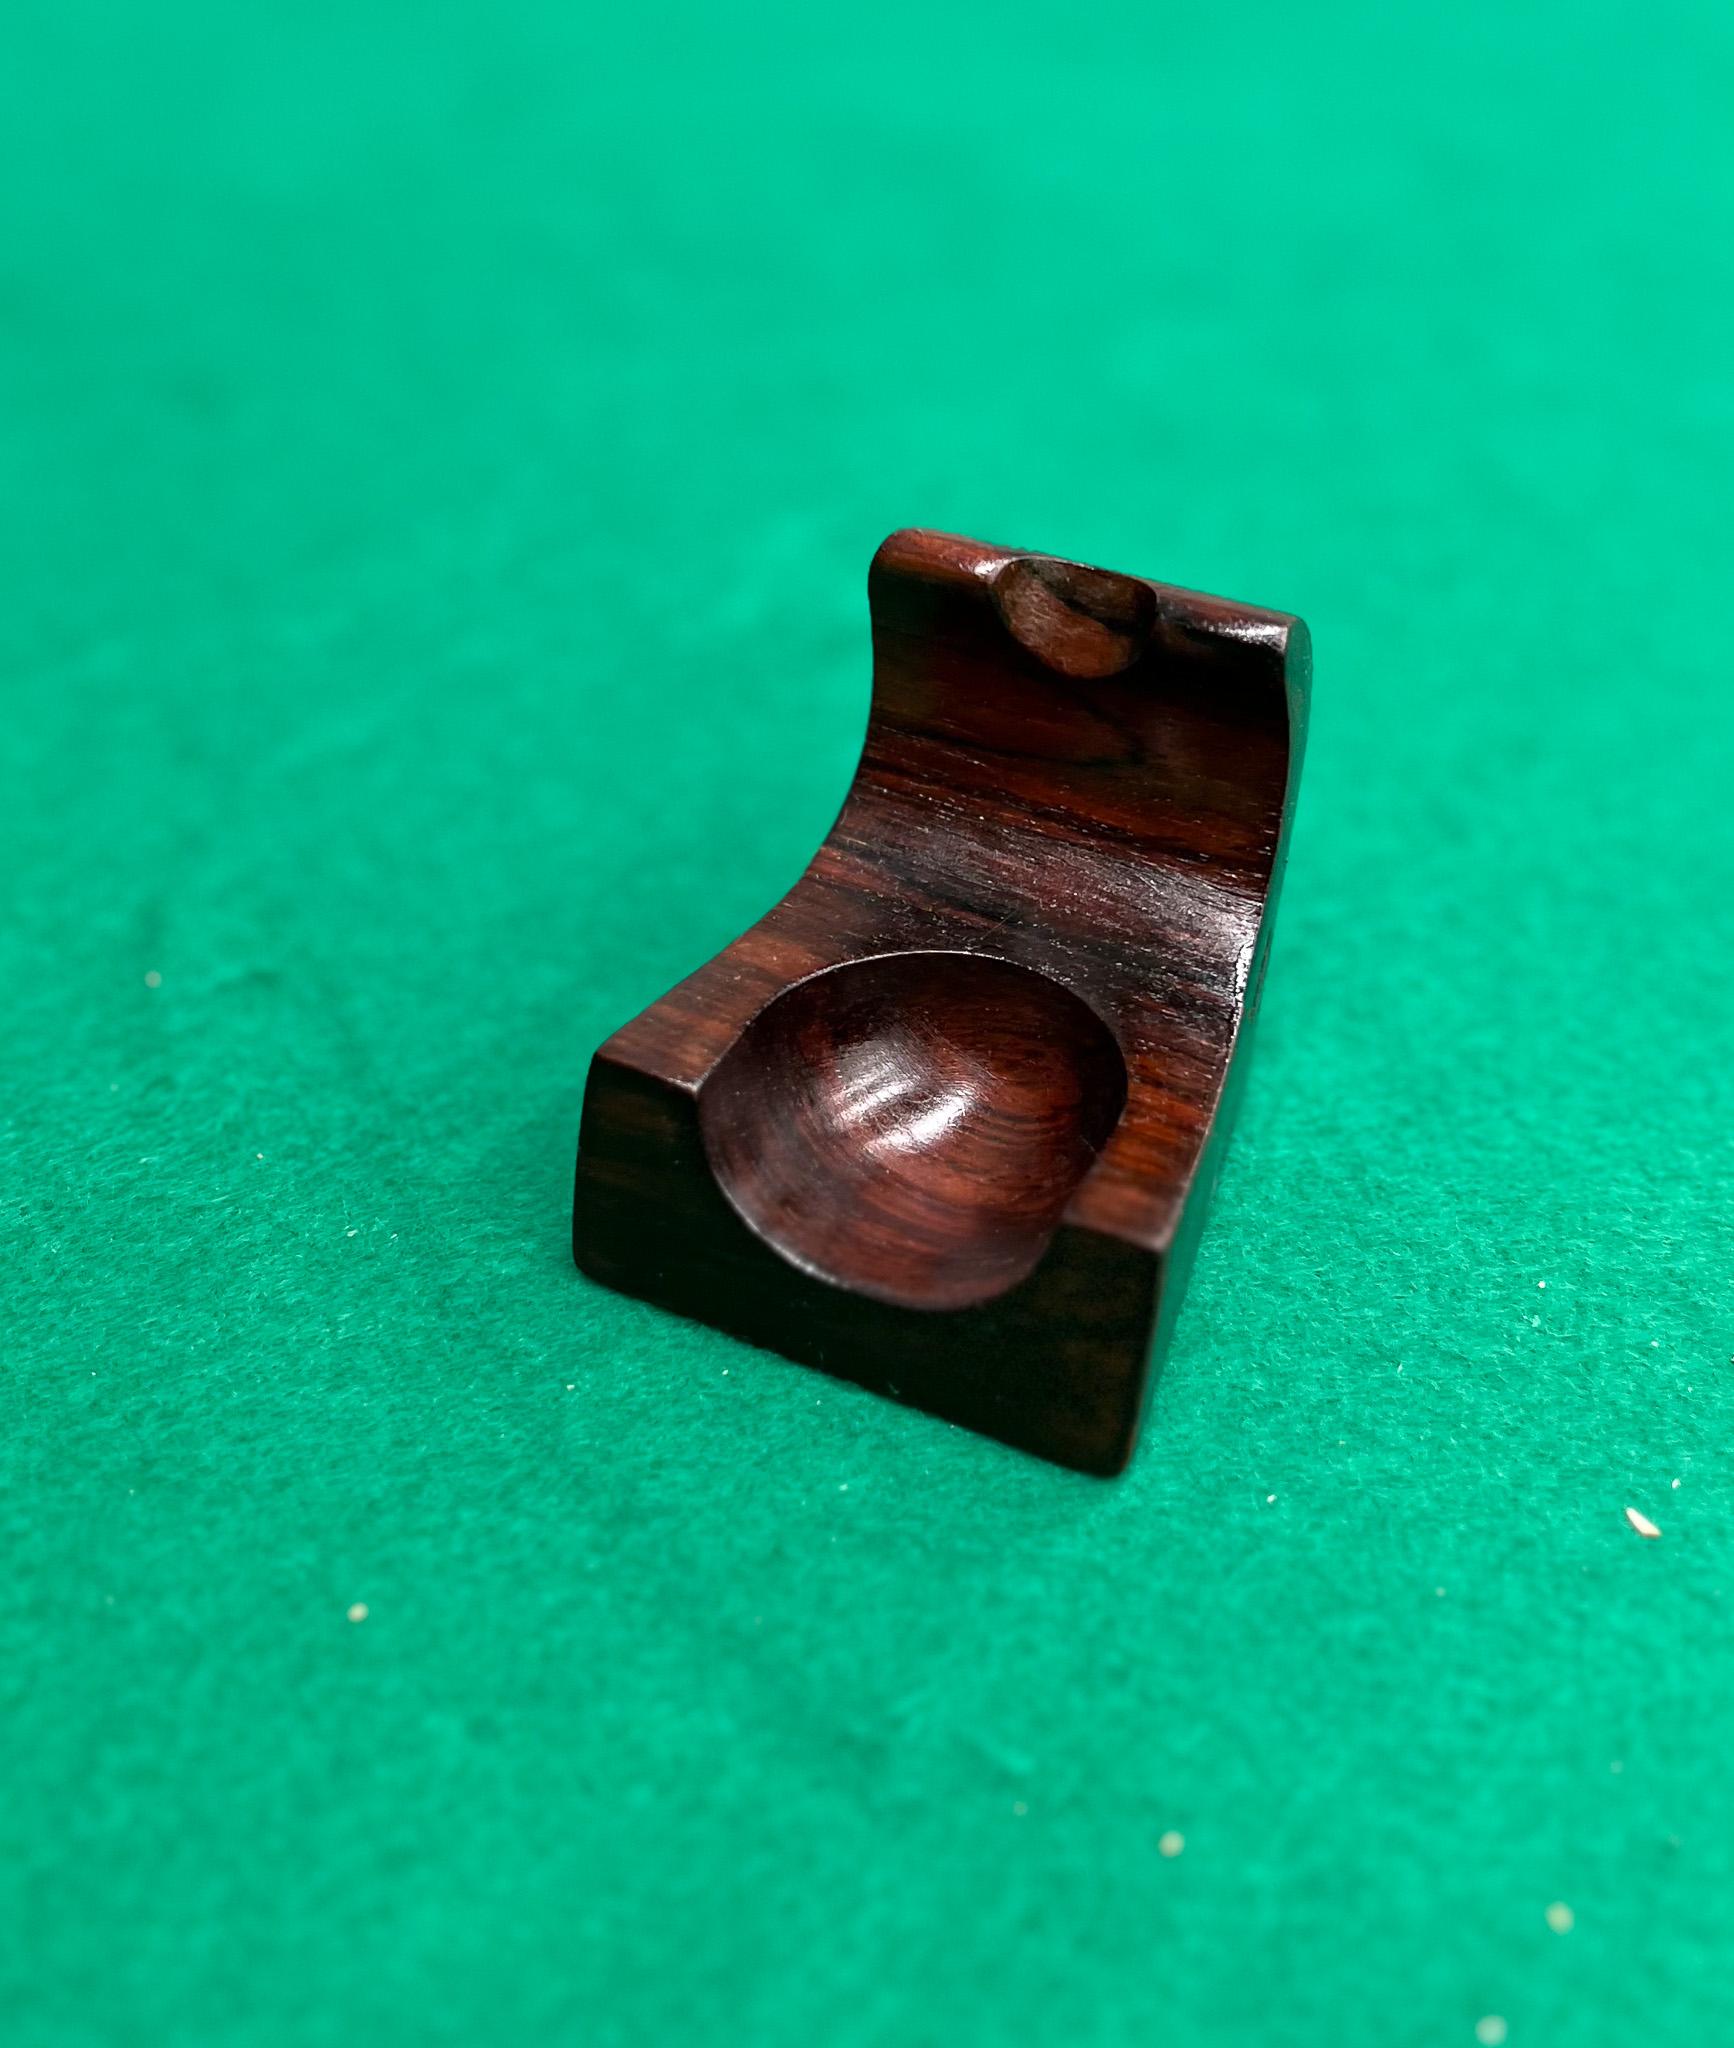 Available today, this Brazilian modern pipe holder, designed by WoodArt, is gorgeous. Handcrafted with Brazilian rosewood (also known as jacaranda), this large pipe holder has beautiful patterns and textures. It has a deep, dark, and rich tone with